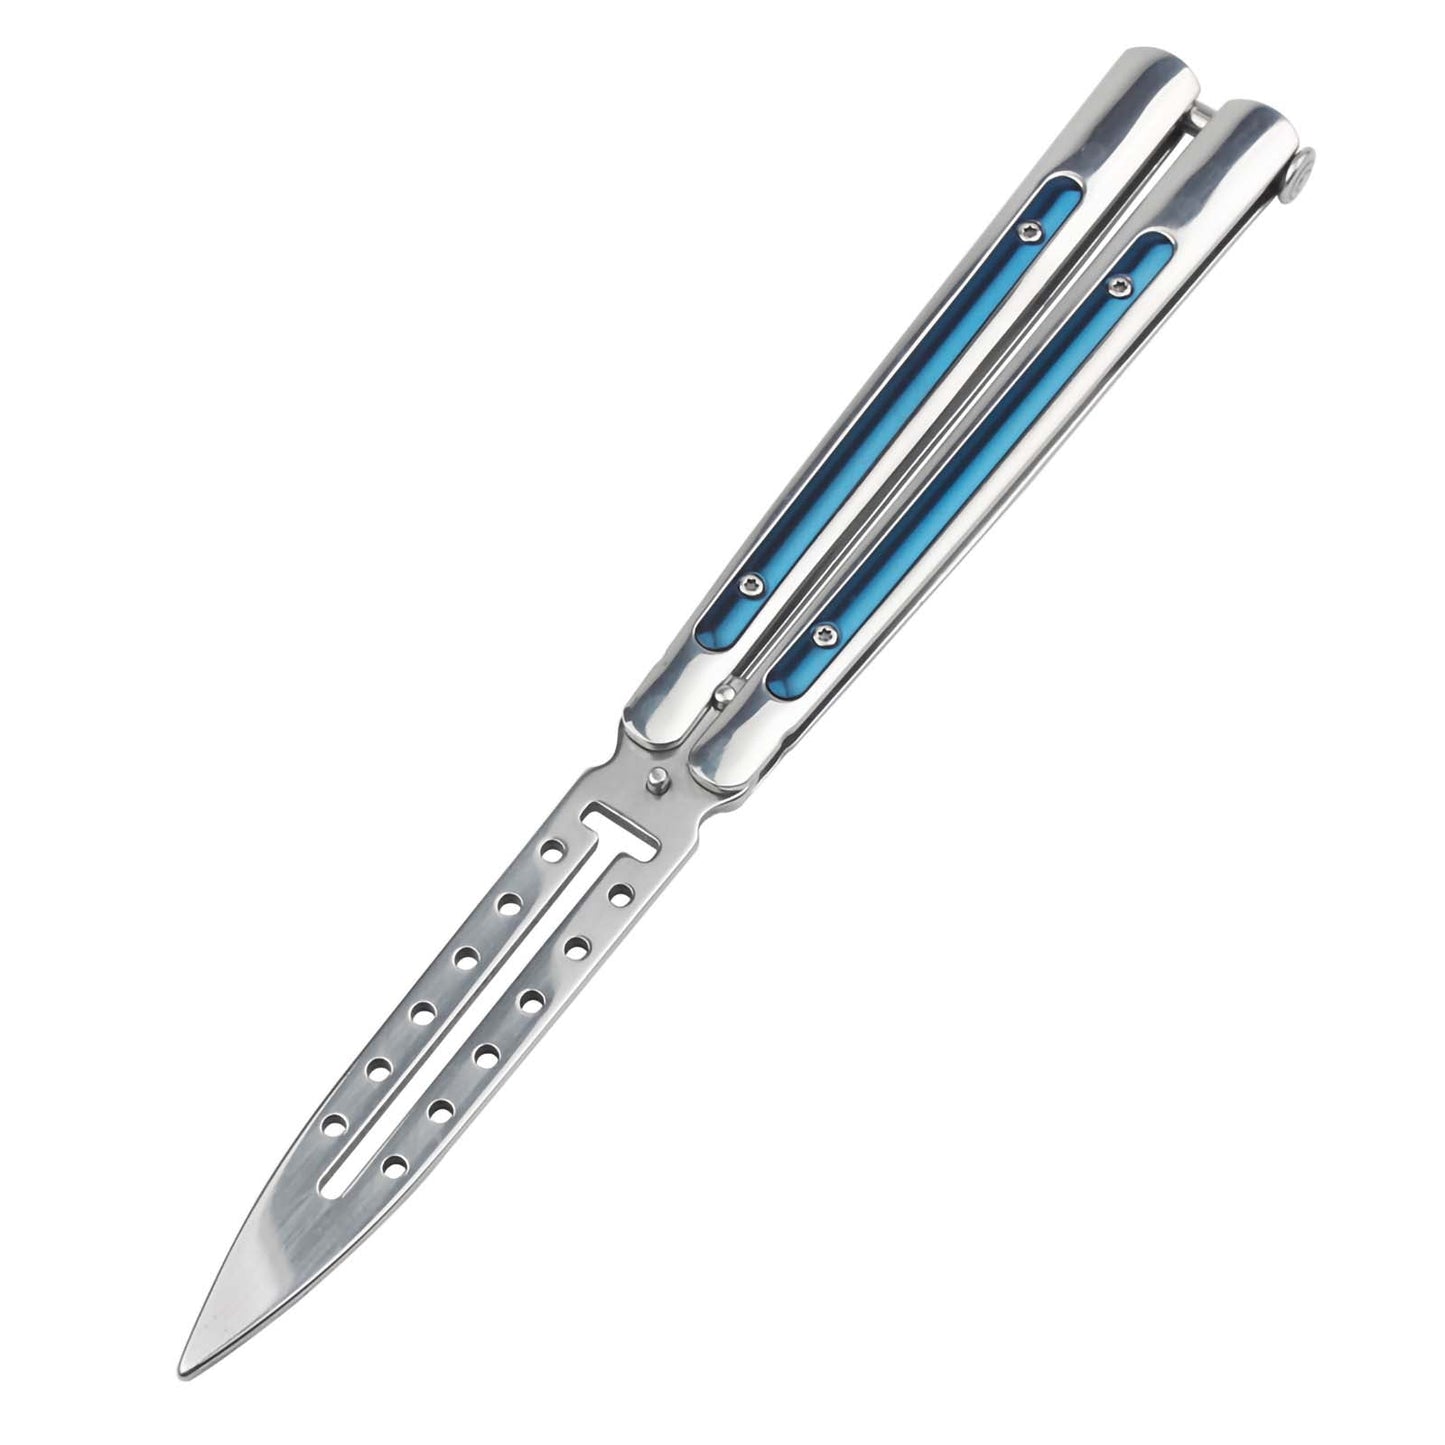 Andux Balisong Flip Player No Screws Type CS/HDD39(Only Available in European Countries)